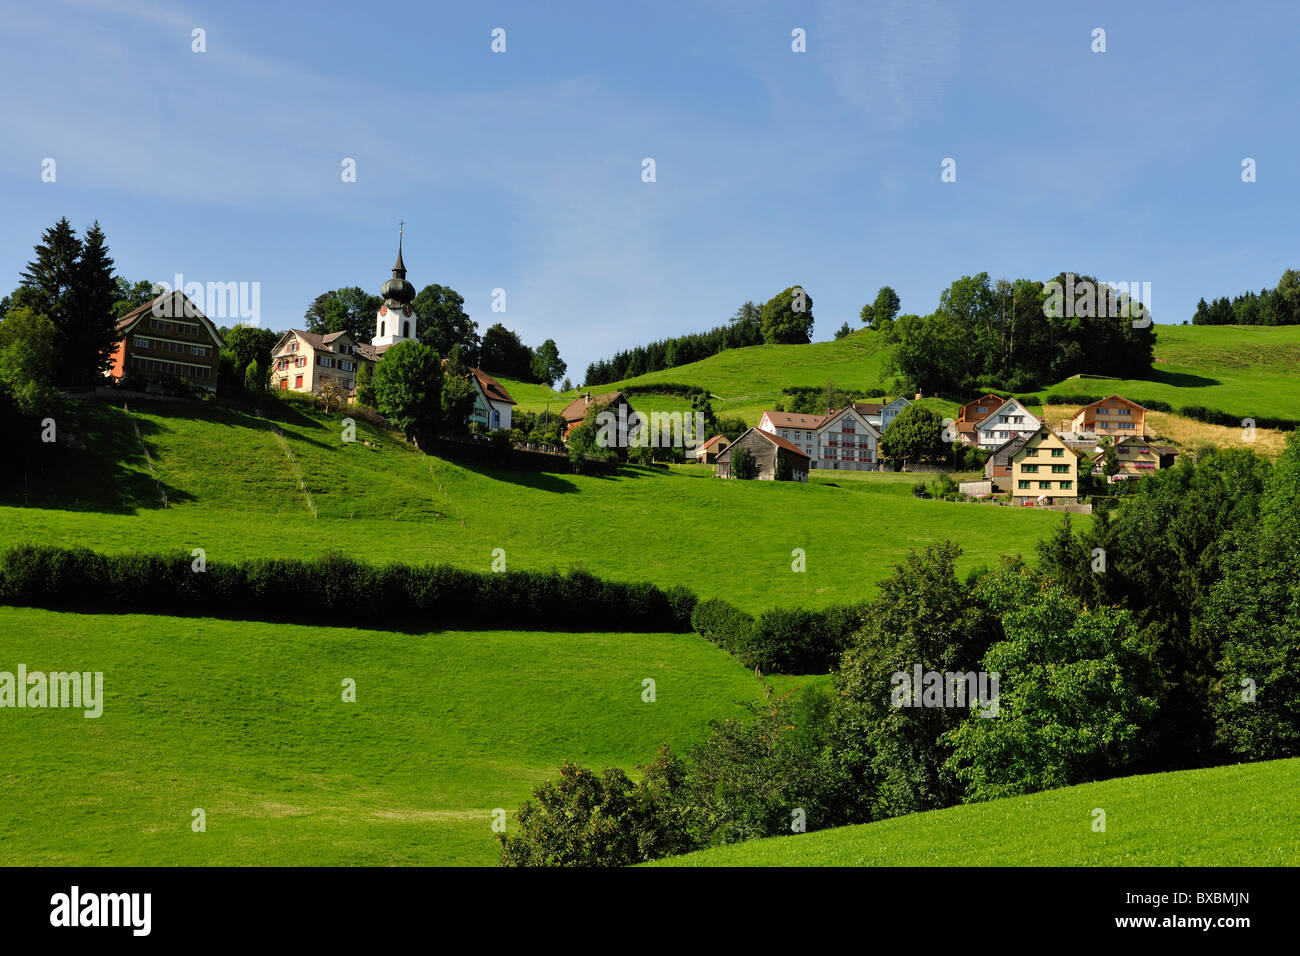 Haslen, a typical village in the canton of Appenzell, Canton of Appenzell, Switzerland, Europe Stock Photo